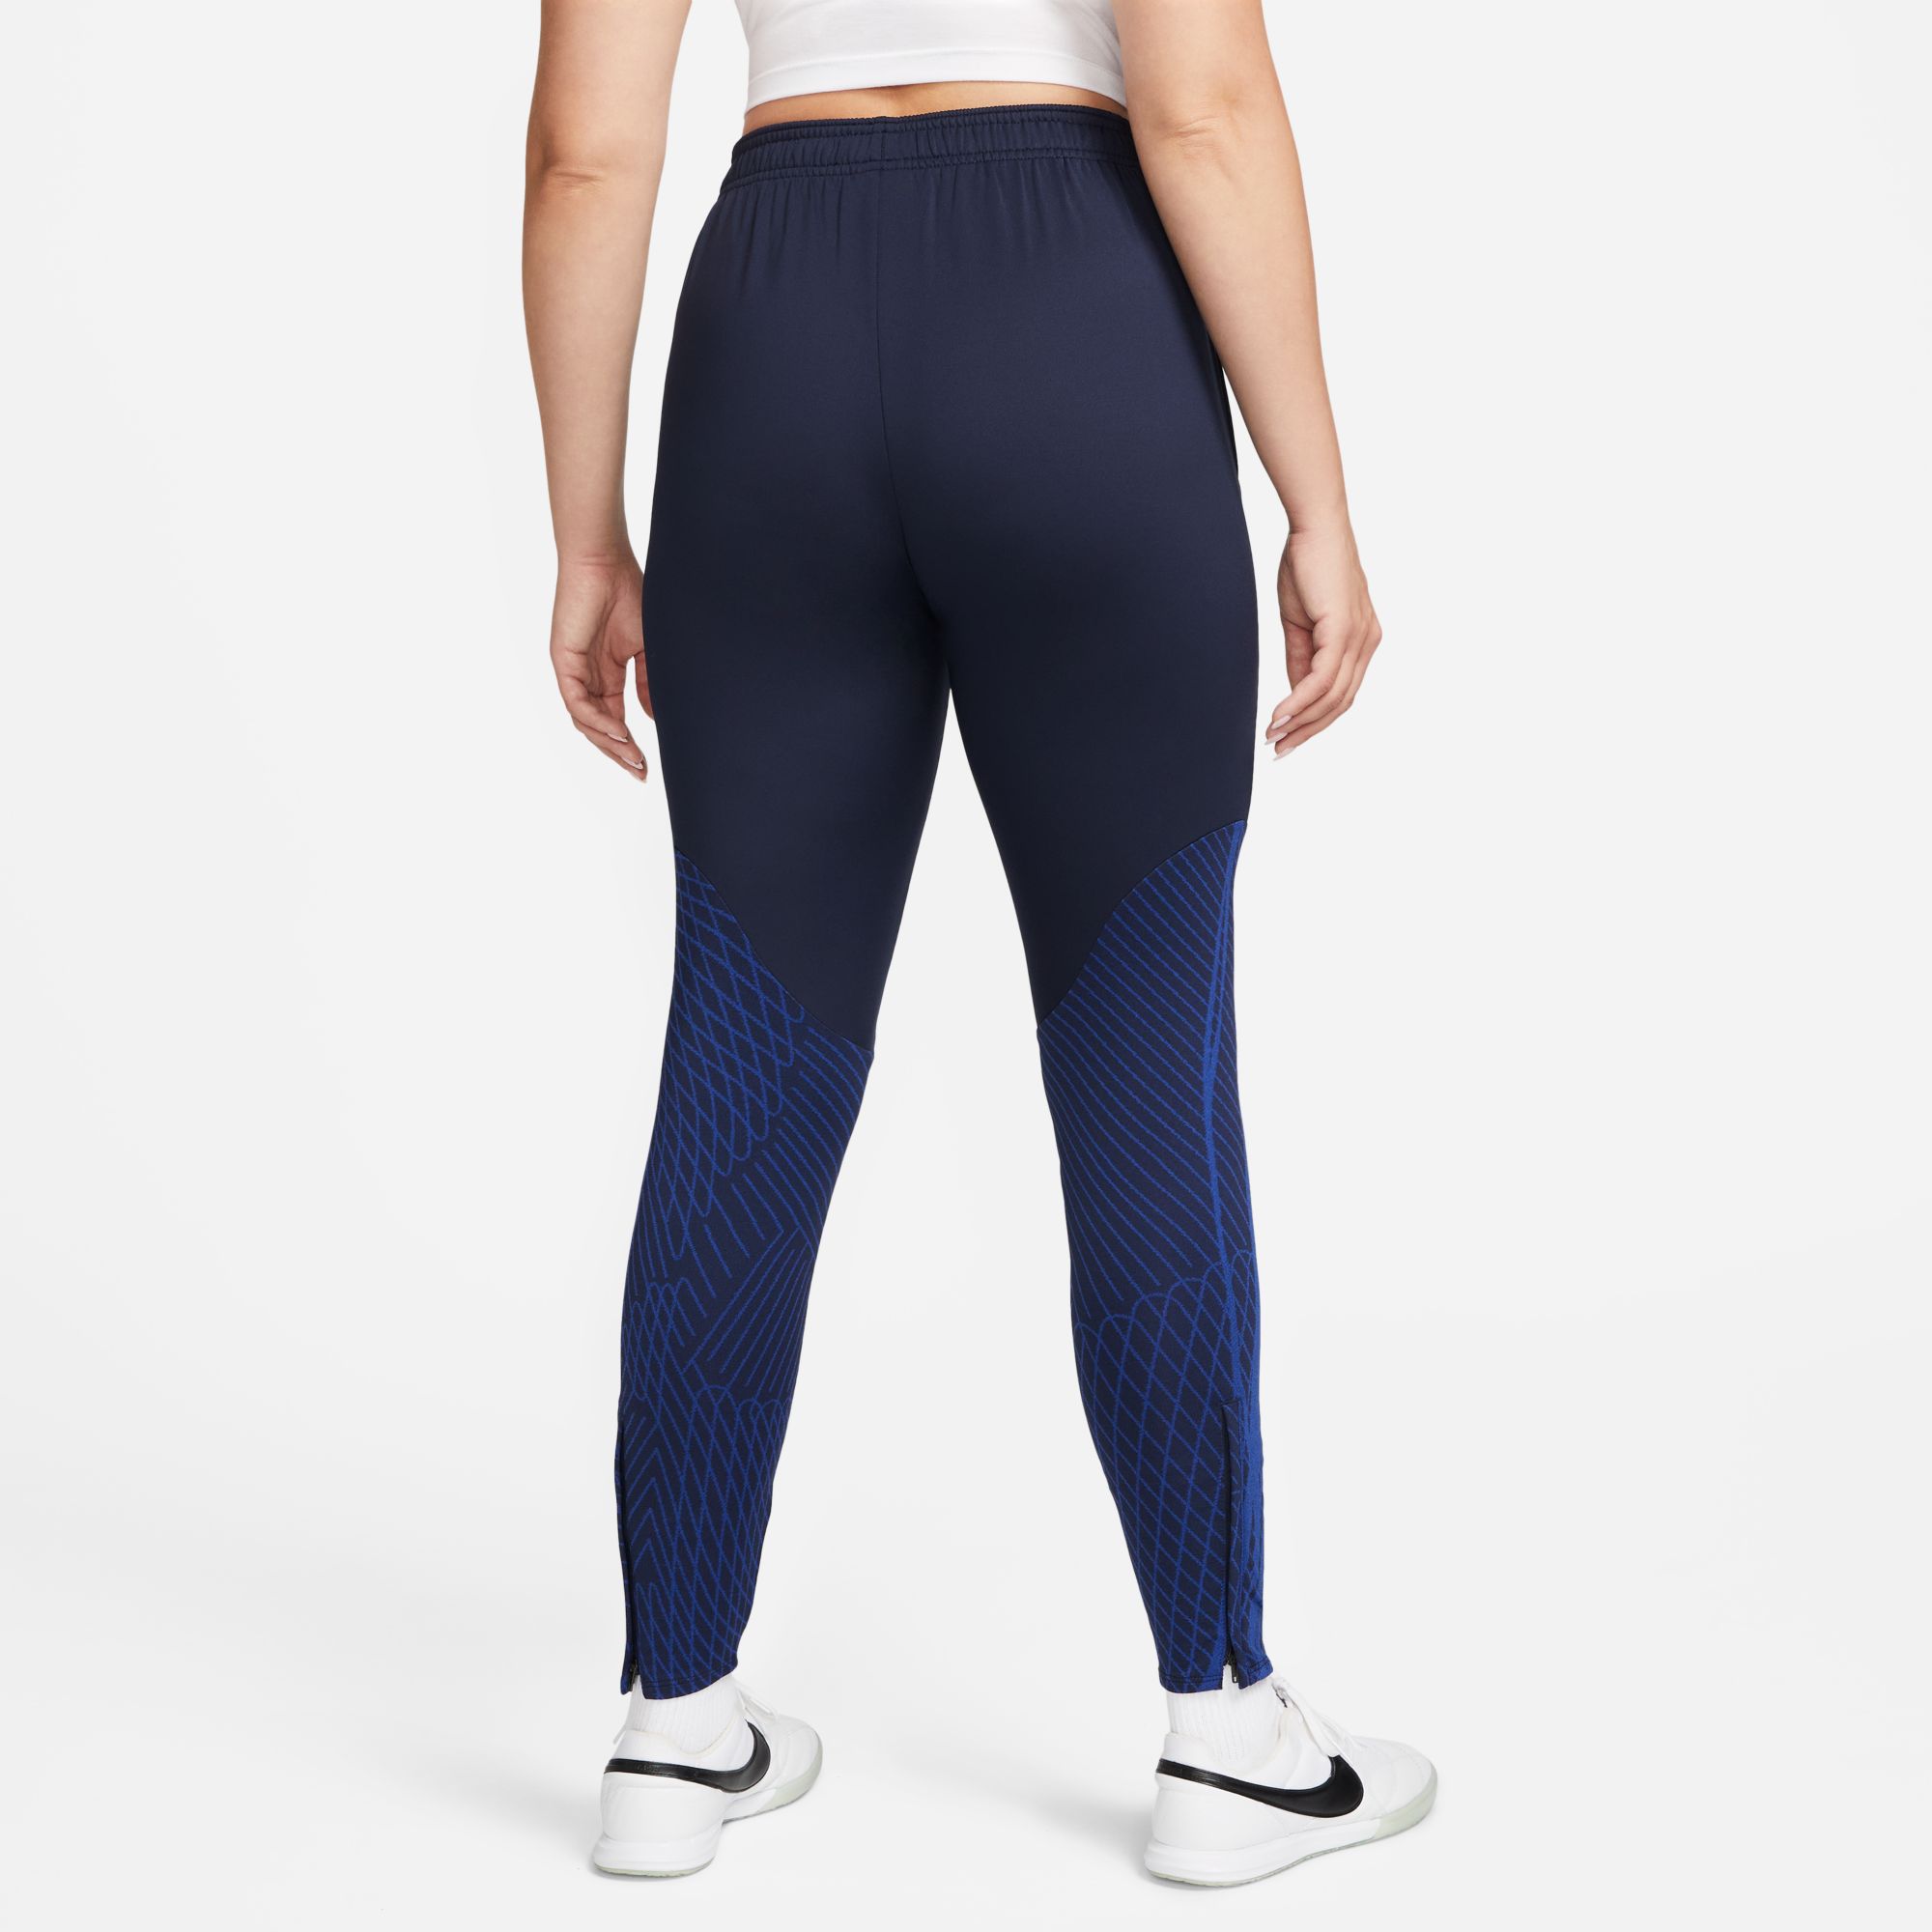 Workout clothes deals: how to get up to 91% off Nike, Adidas